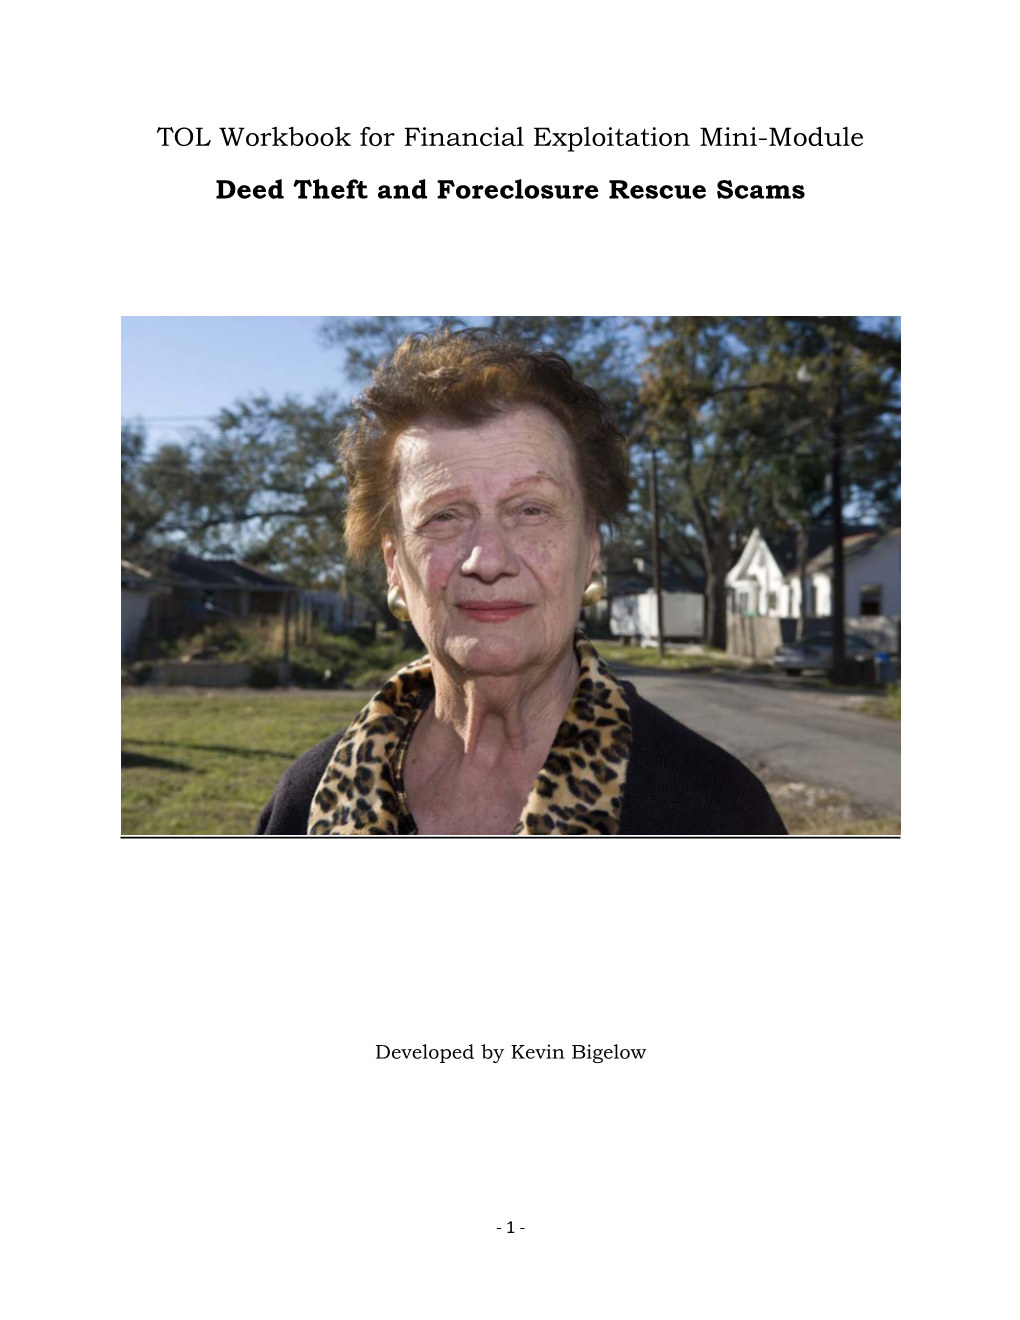 Deed Theft and Foreclosure Scams TOL Supervisor Workbook